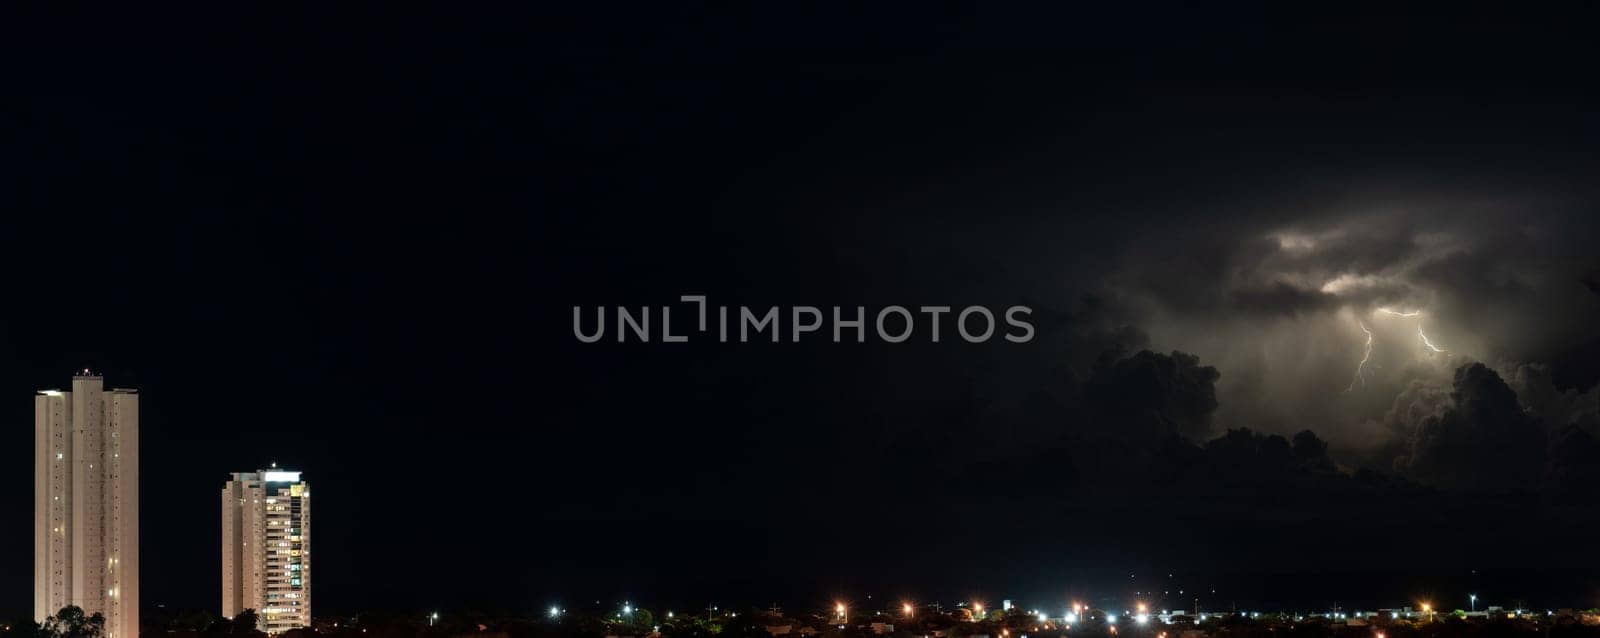 Two skyscrapers rise above the city in a majestic manner during a dark night with thunder and lightning in the background. Space for text available.